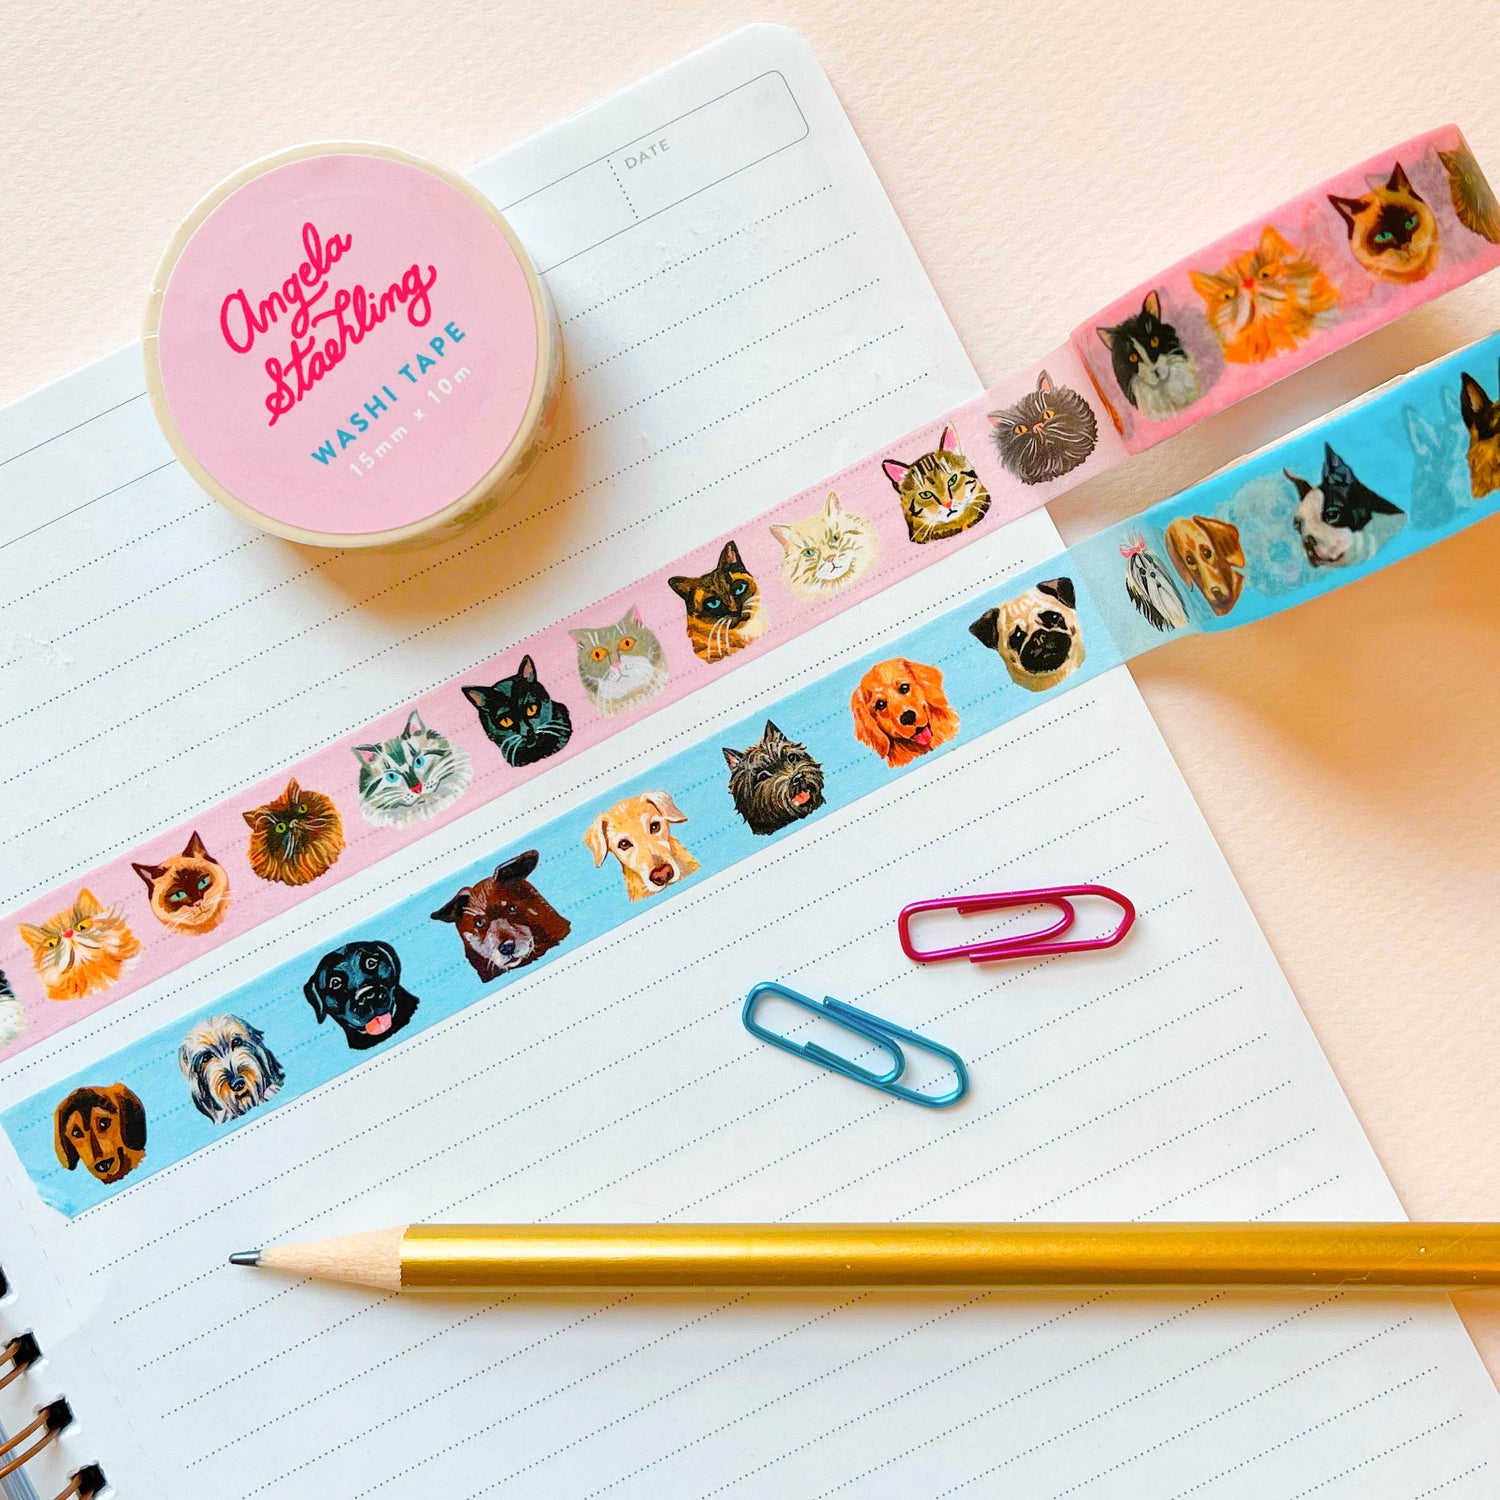 Dog washit tape and cat washi tape with paper clips and pencil